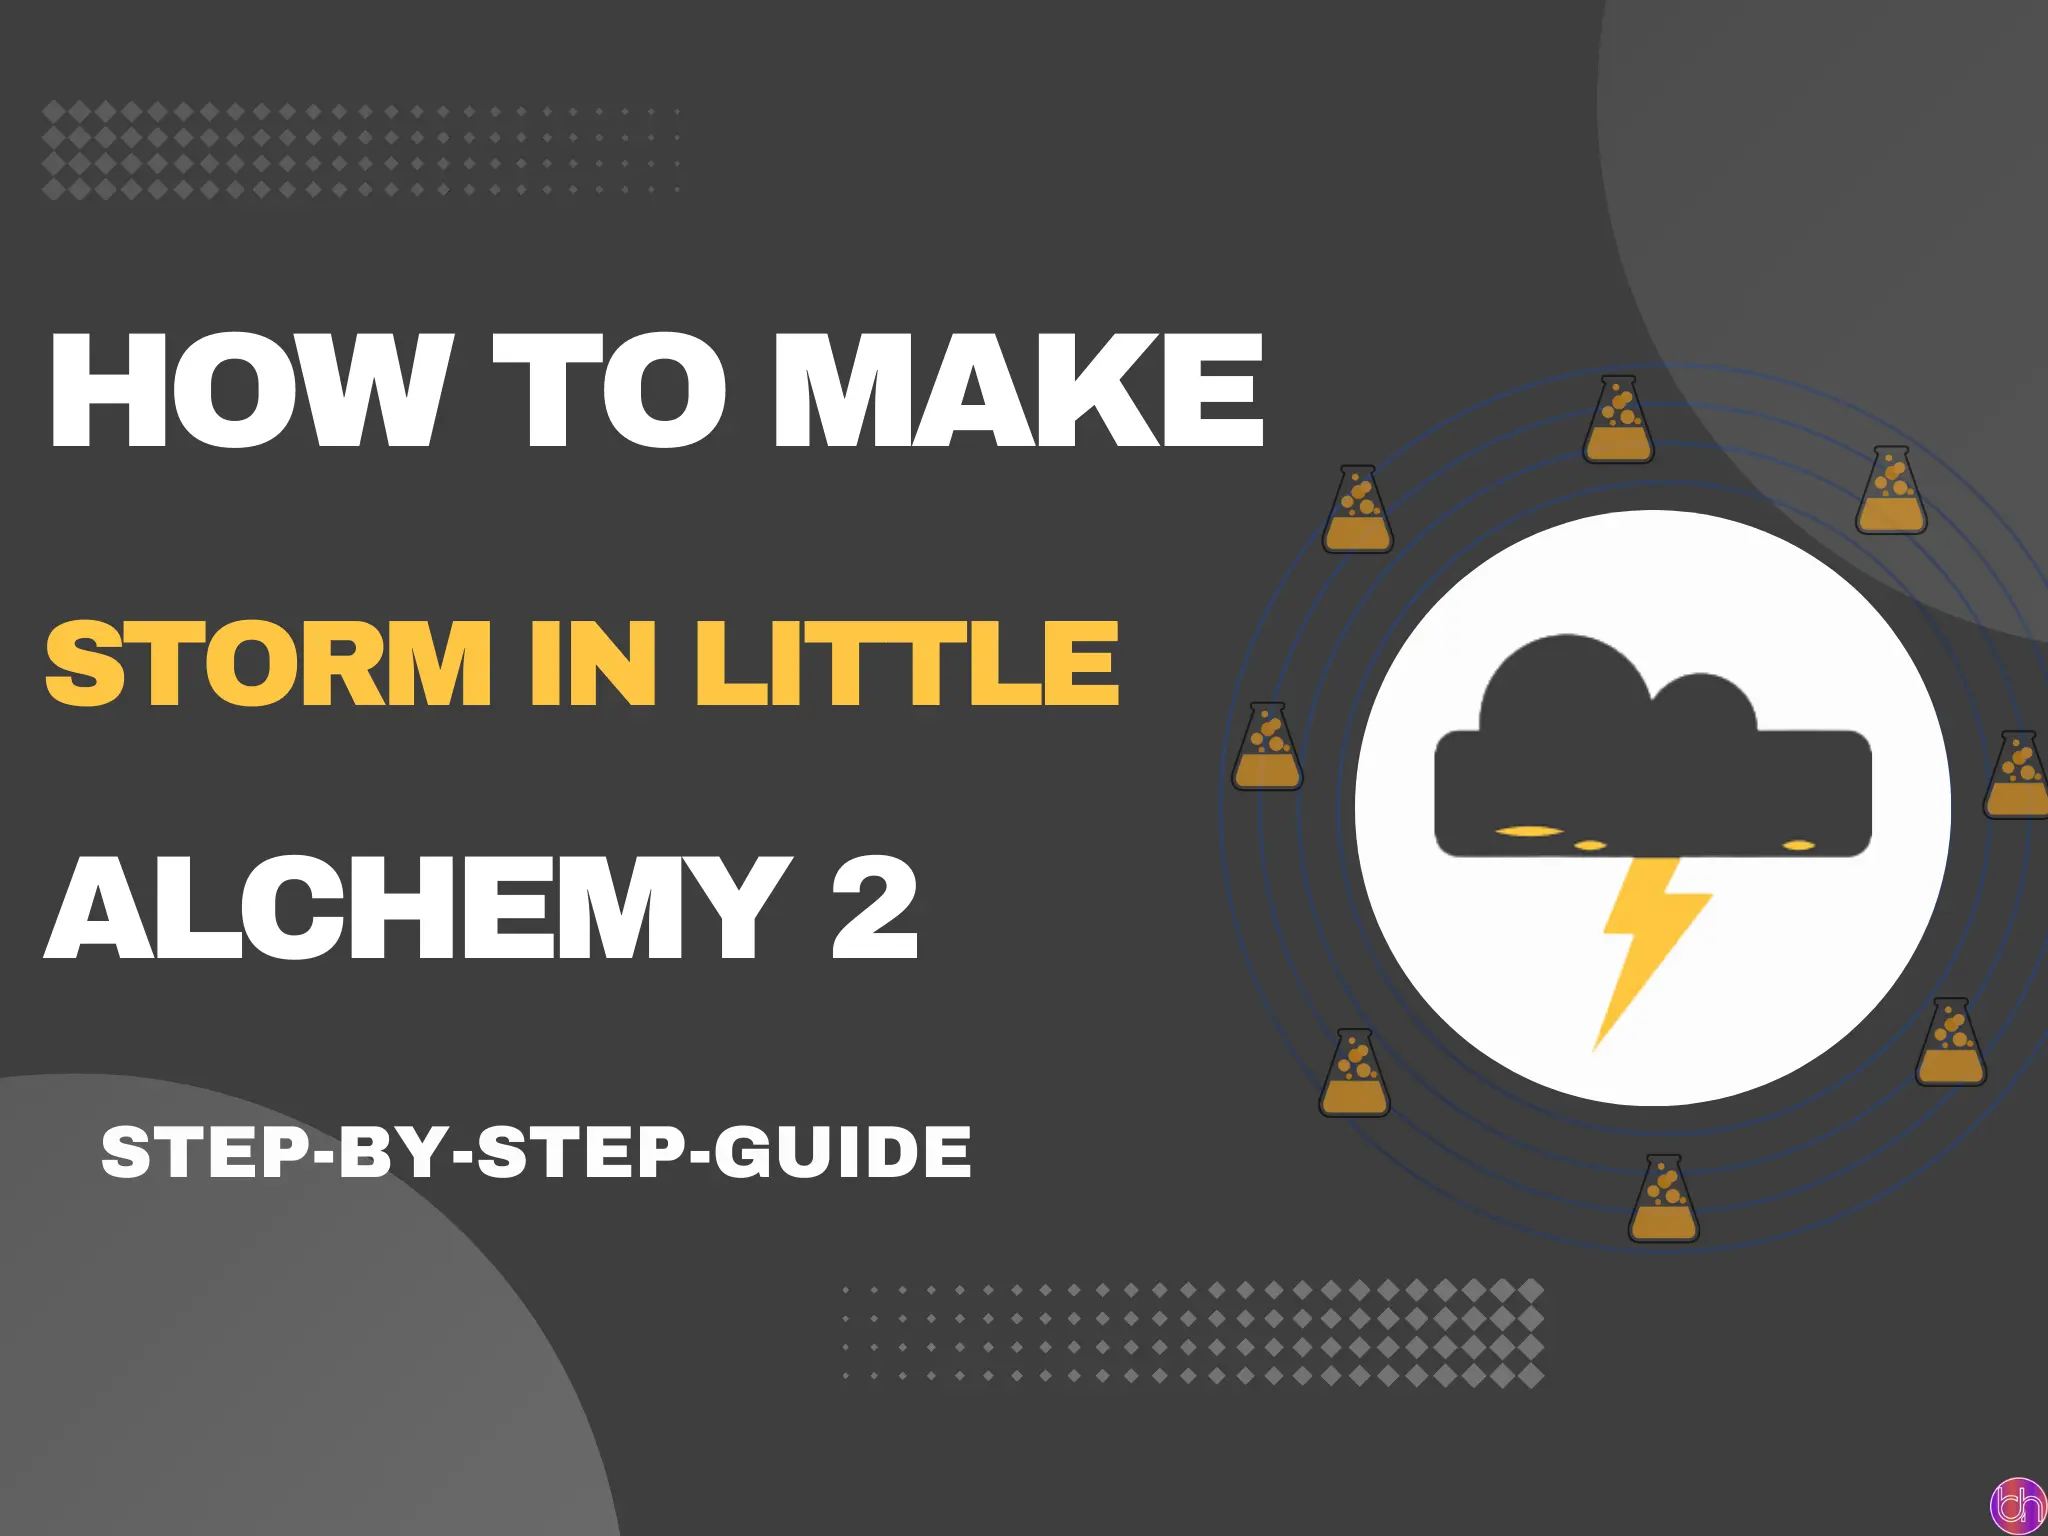 how to make storm in little alchemy 2